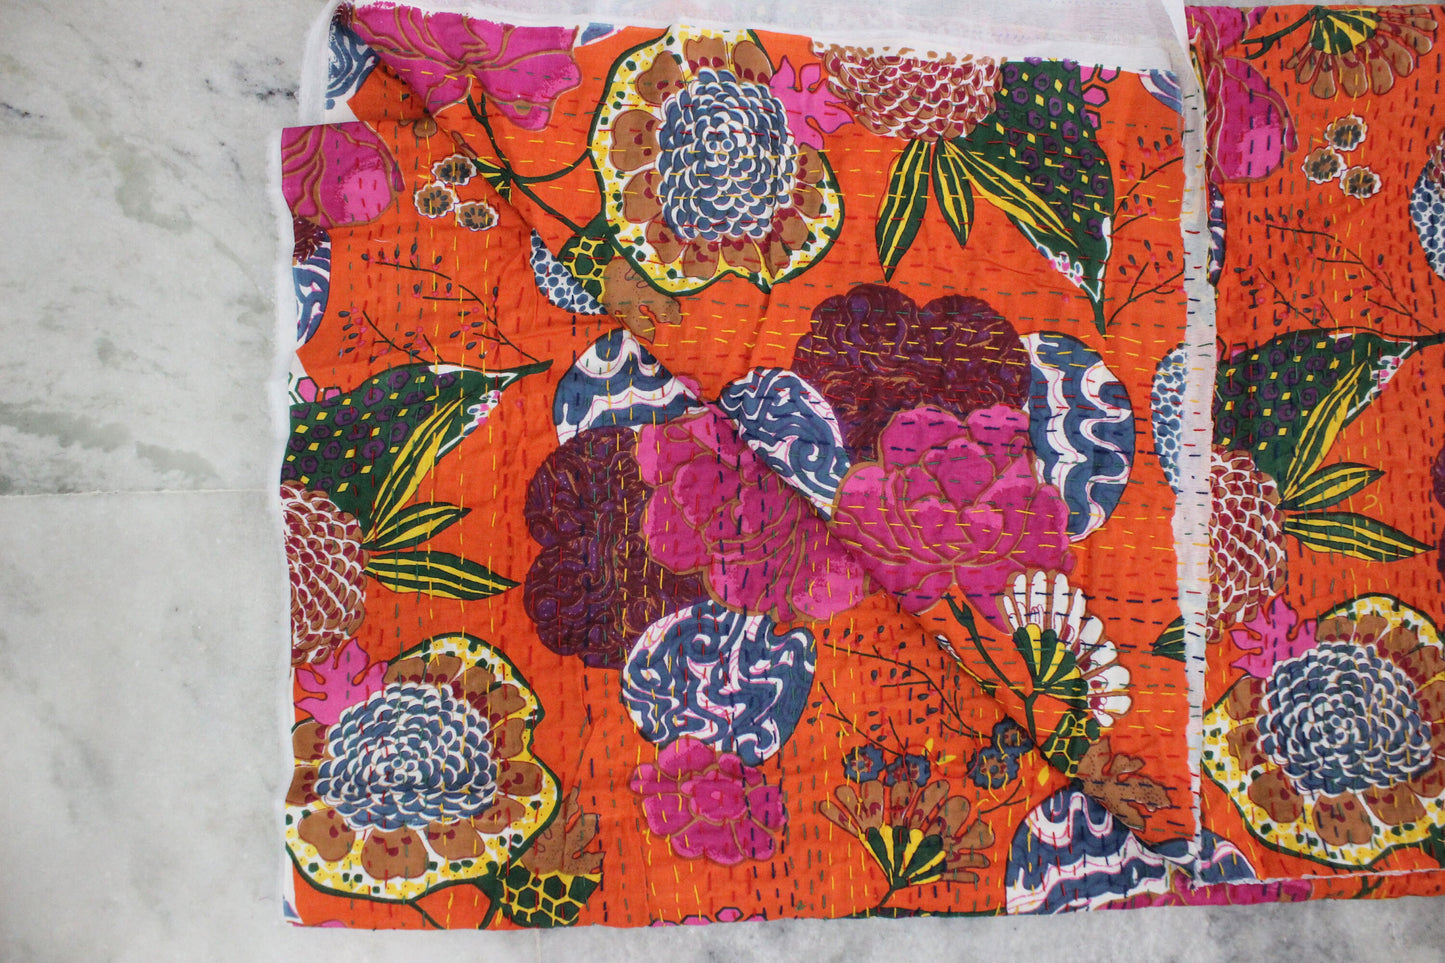 Orange Bohemian Fabric by the yard Embroidered Printed Home Decor Fabric Floral Indian Fabric Boho Indian Textile Fabric Kantha Fabrics